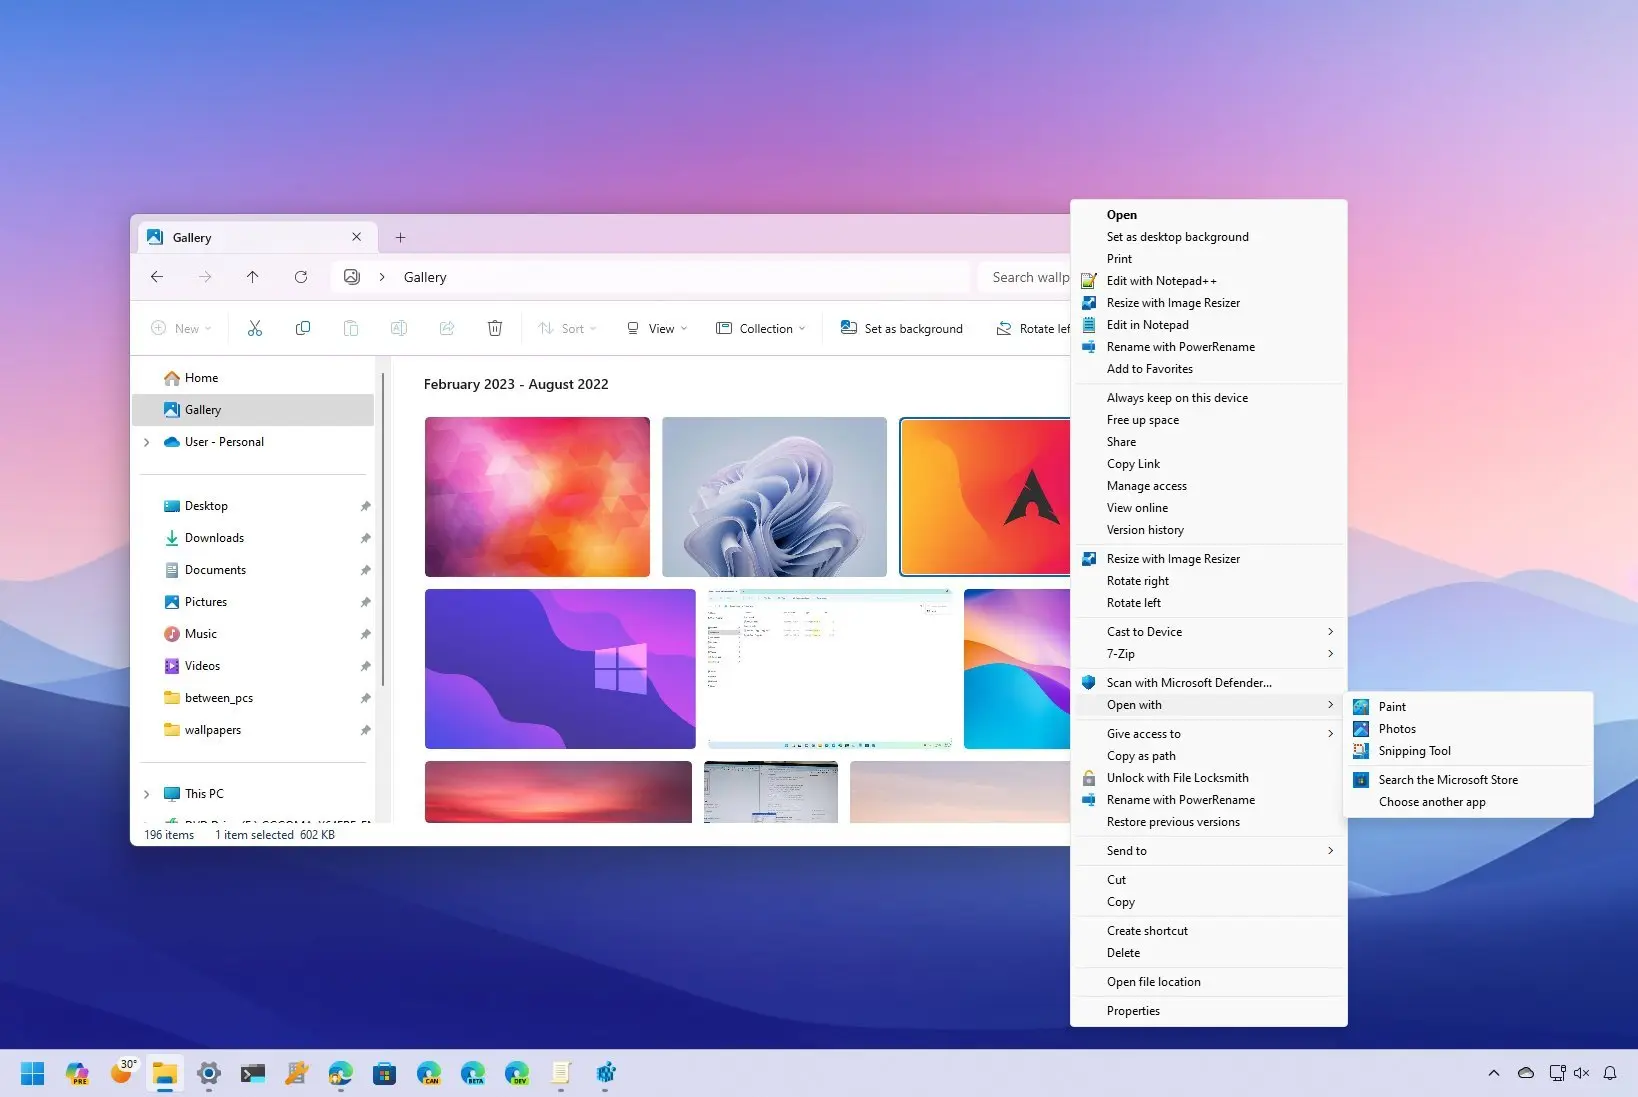 How to bring back classic context menu on Windows 11